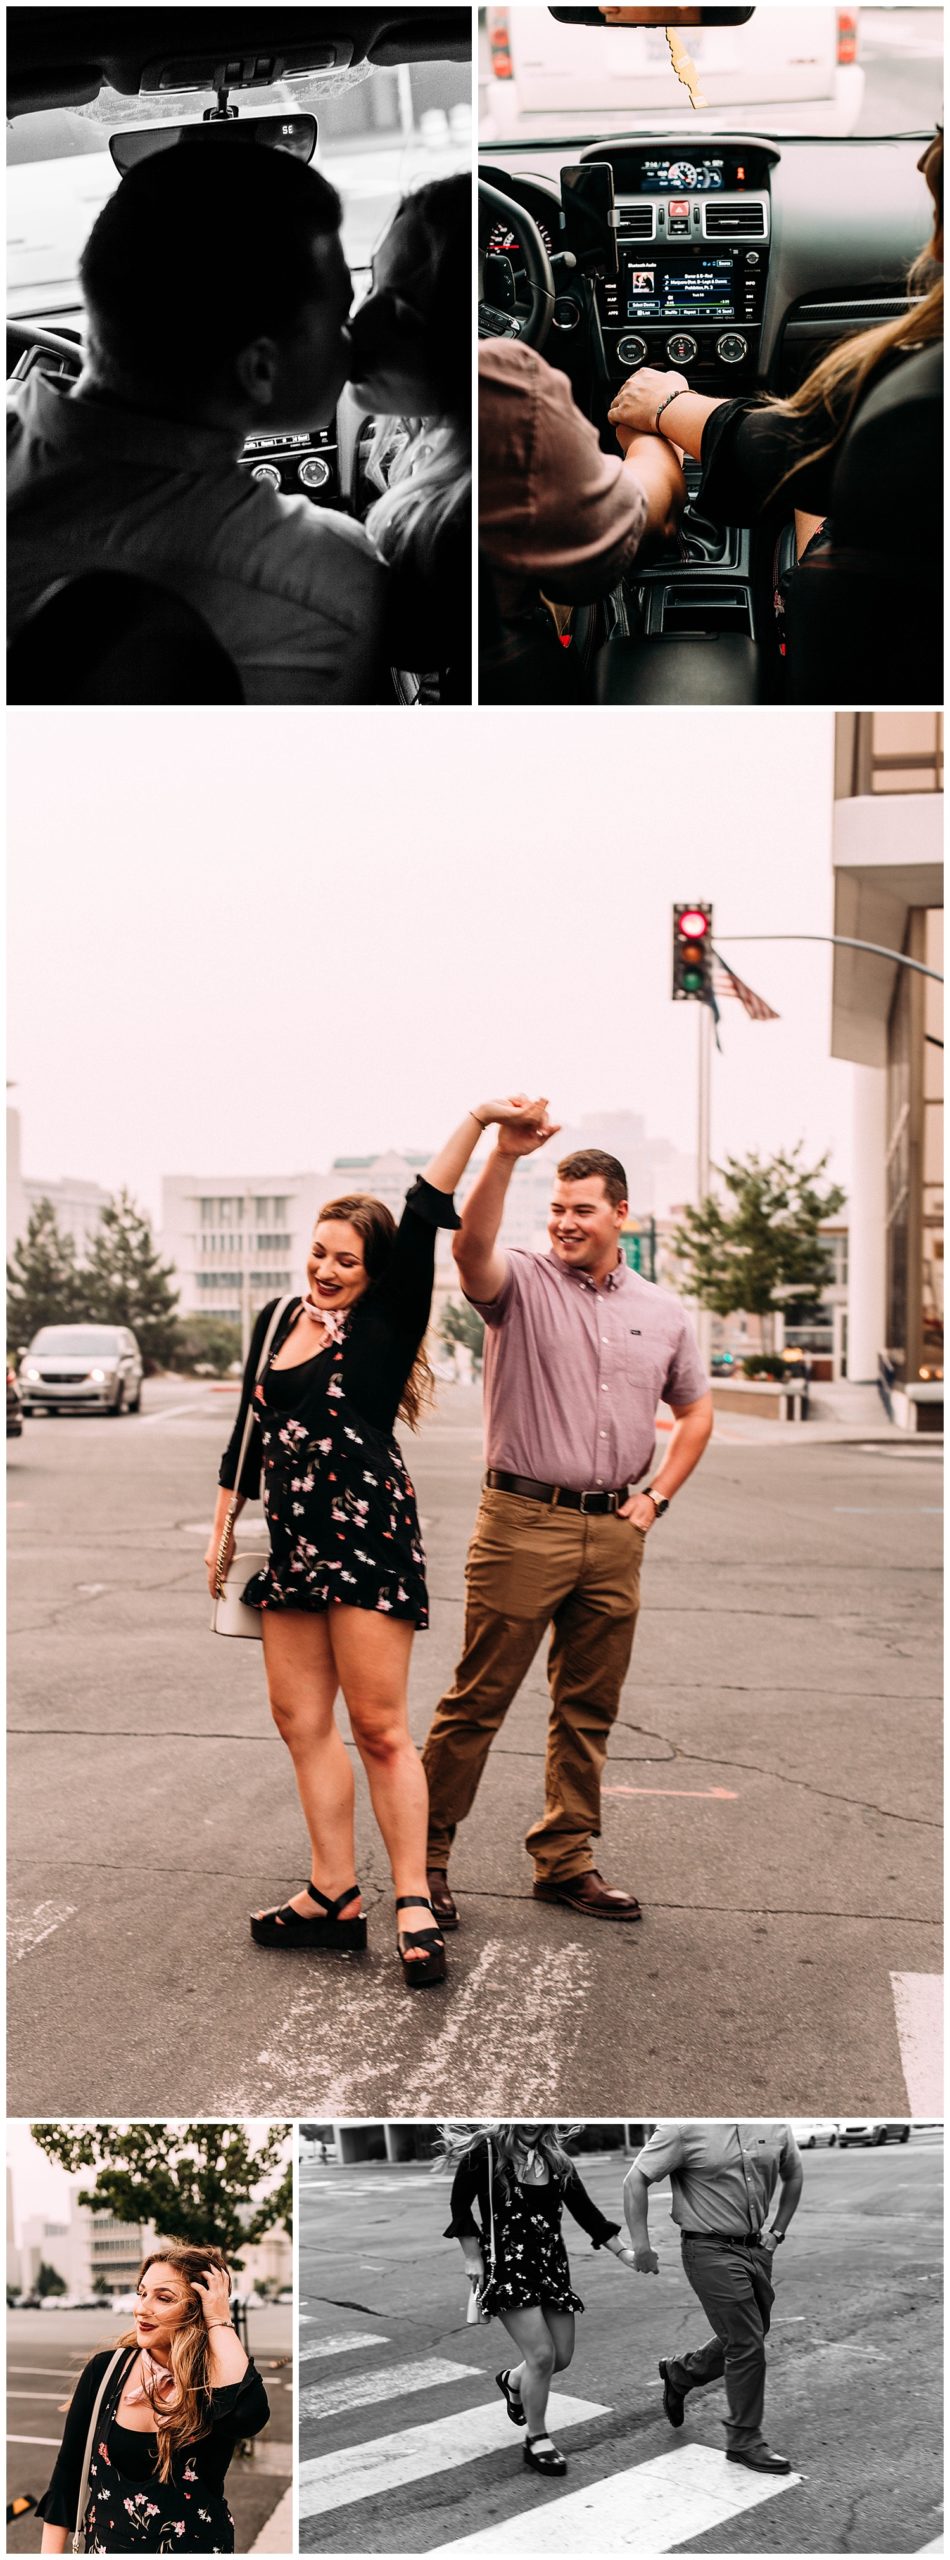 Haley + Corey | Couples Date Session | Downtown Reno, NV.jpg